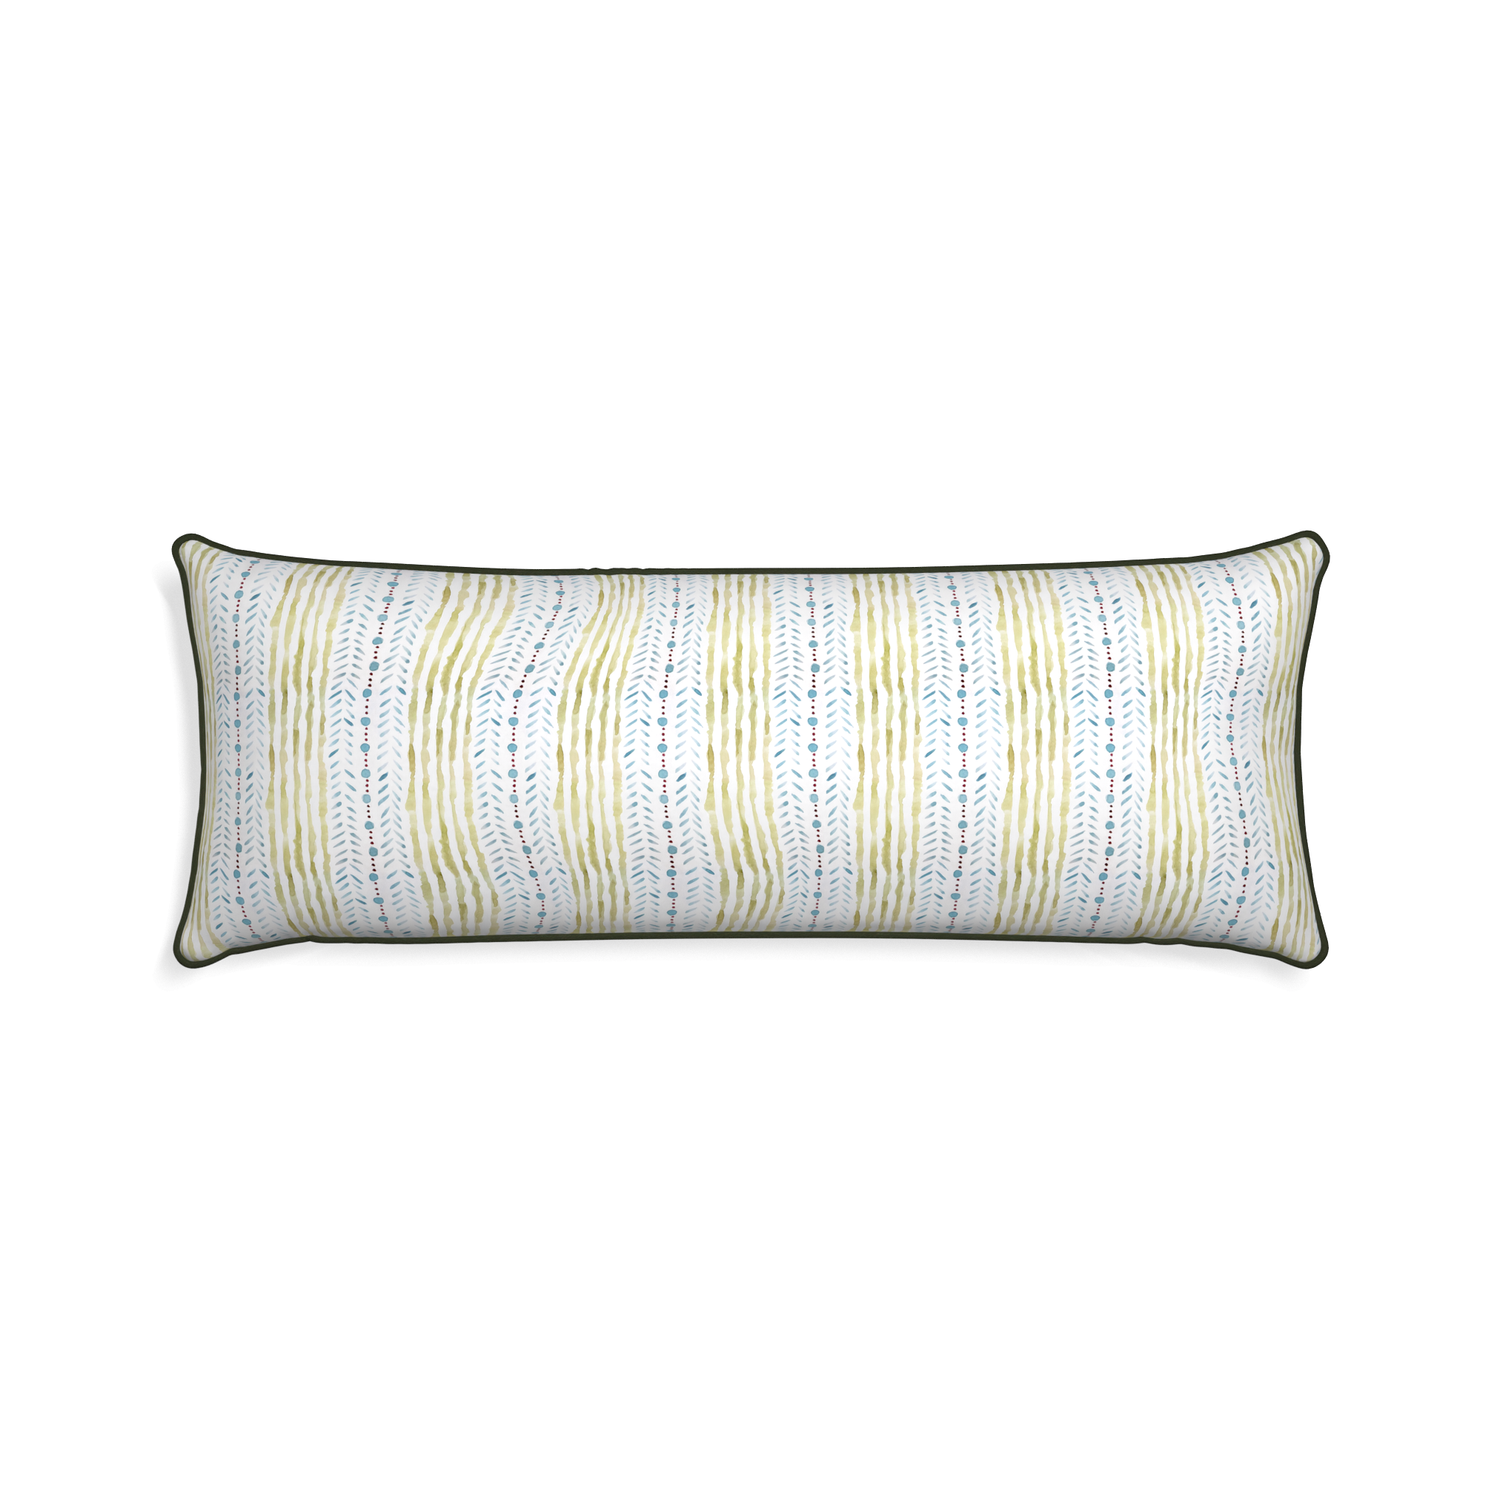 Xl-lumbar julia custom blue & green stripedpillow with f piping on white background